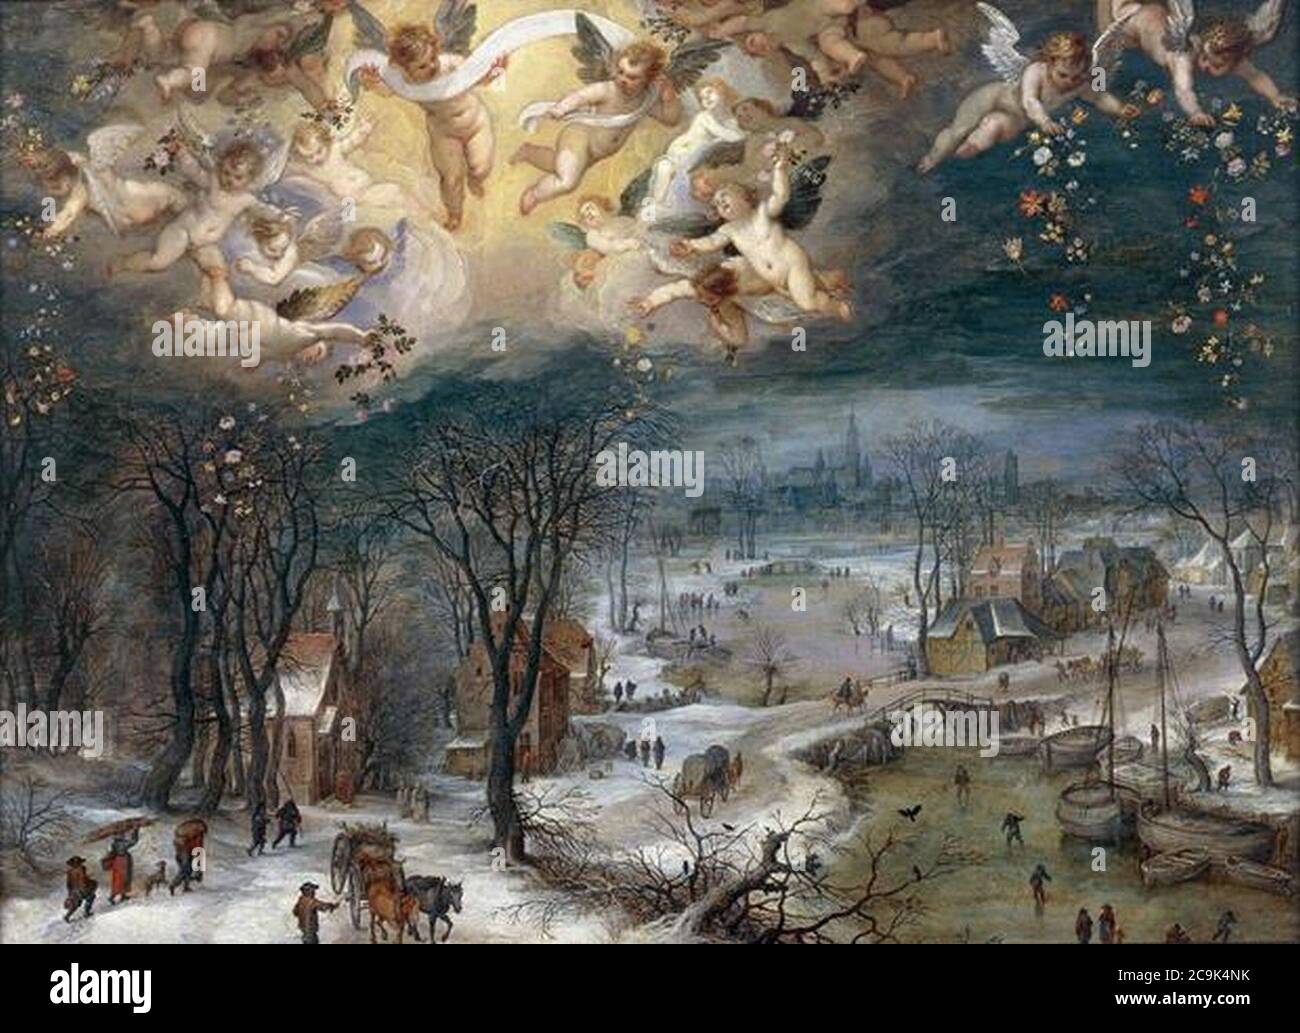 Jan Brueghel the Elder and Hans Rottenhammer - Winter landscape with a glory of angels. Stock Photo